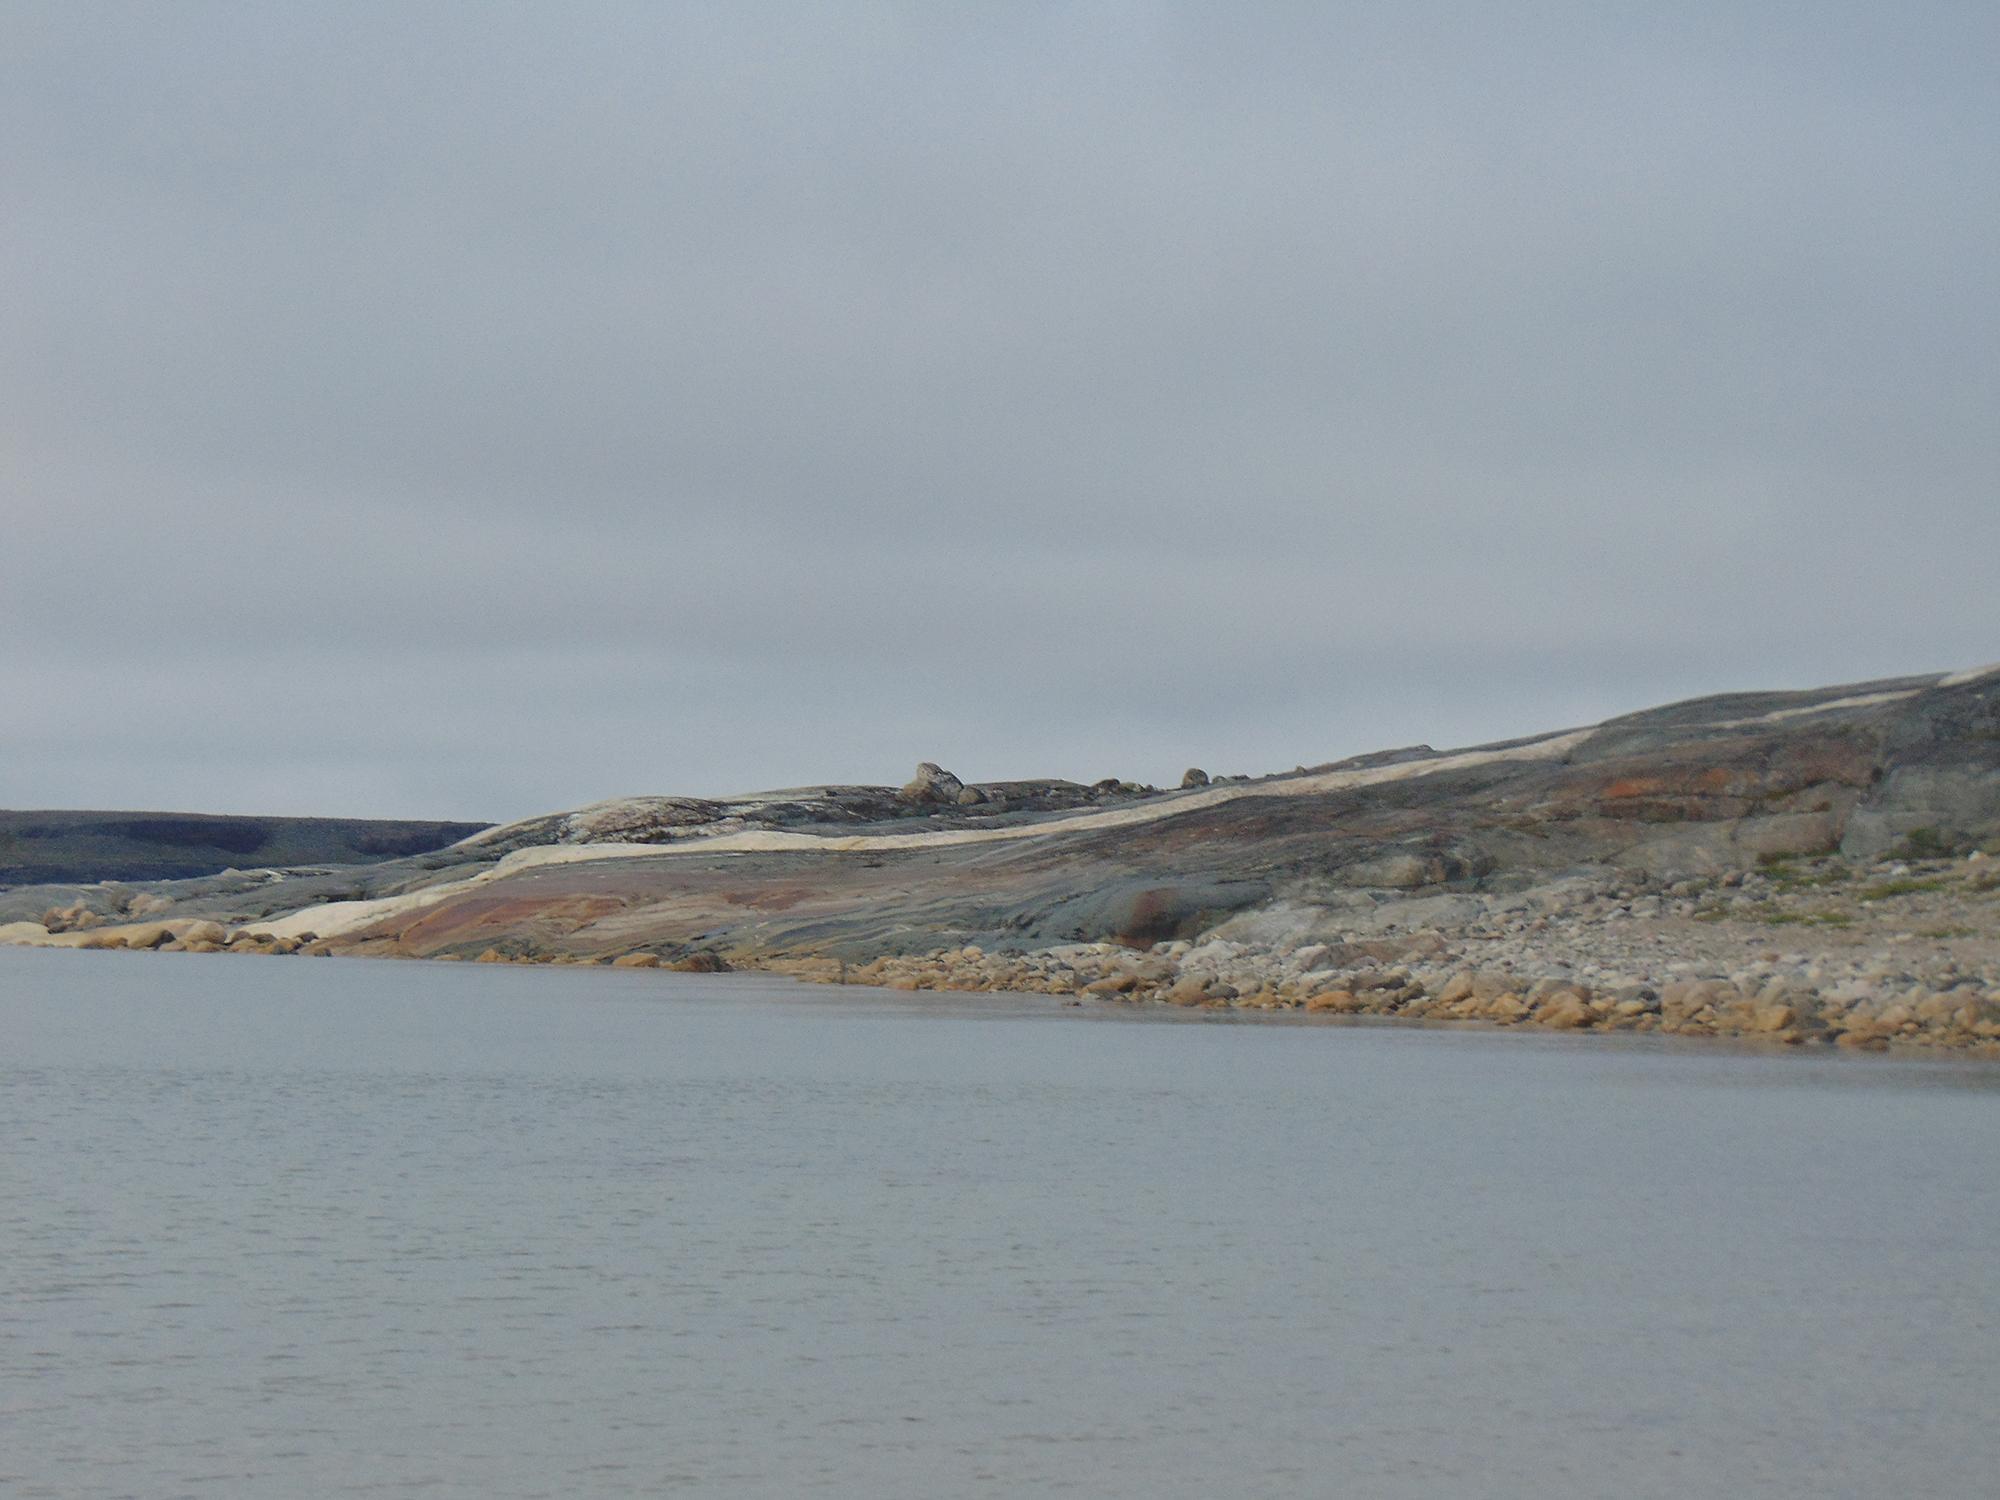 A new study of rock minerals in Nuvvuagittuq, Canada revealed evidence that the Earth's continental crust might have formed hundreds of millions of years earlier than thought. (Elizabeth Bell / UCLA)